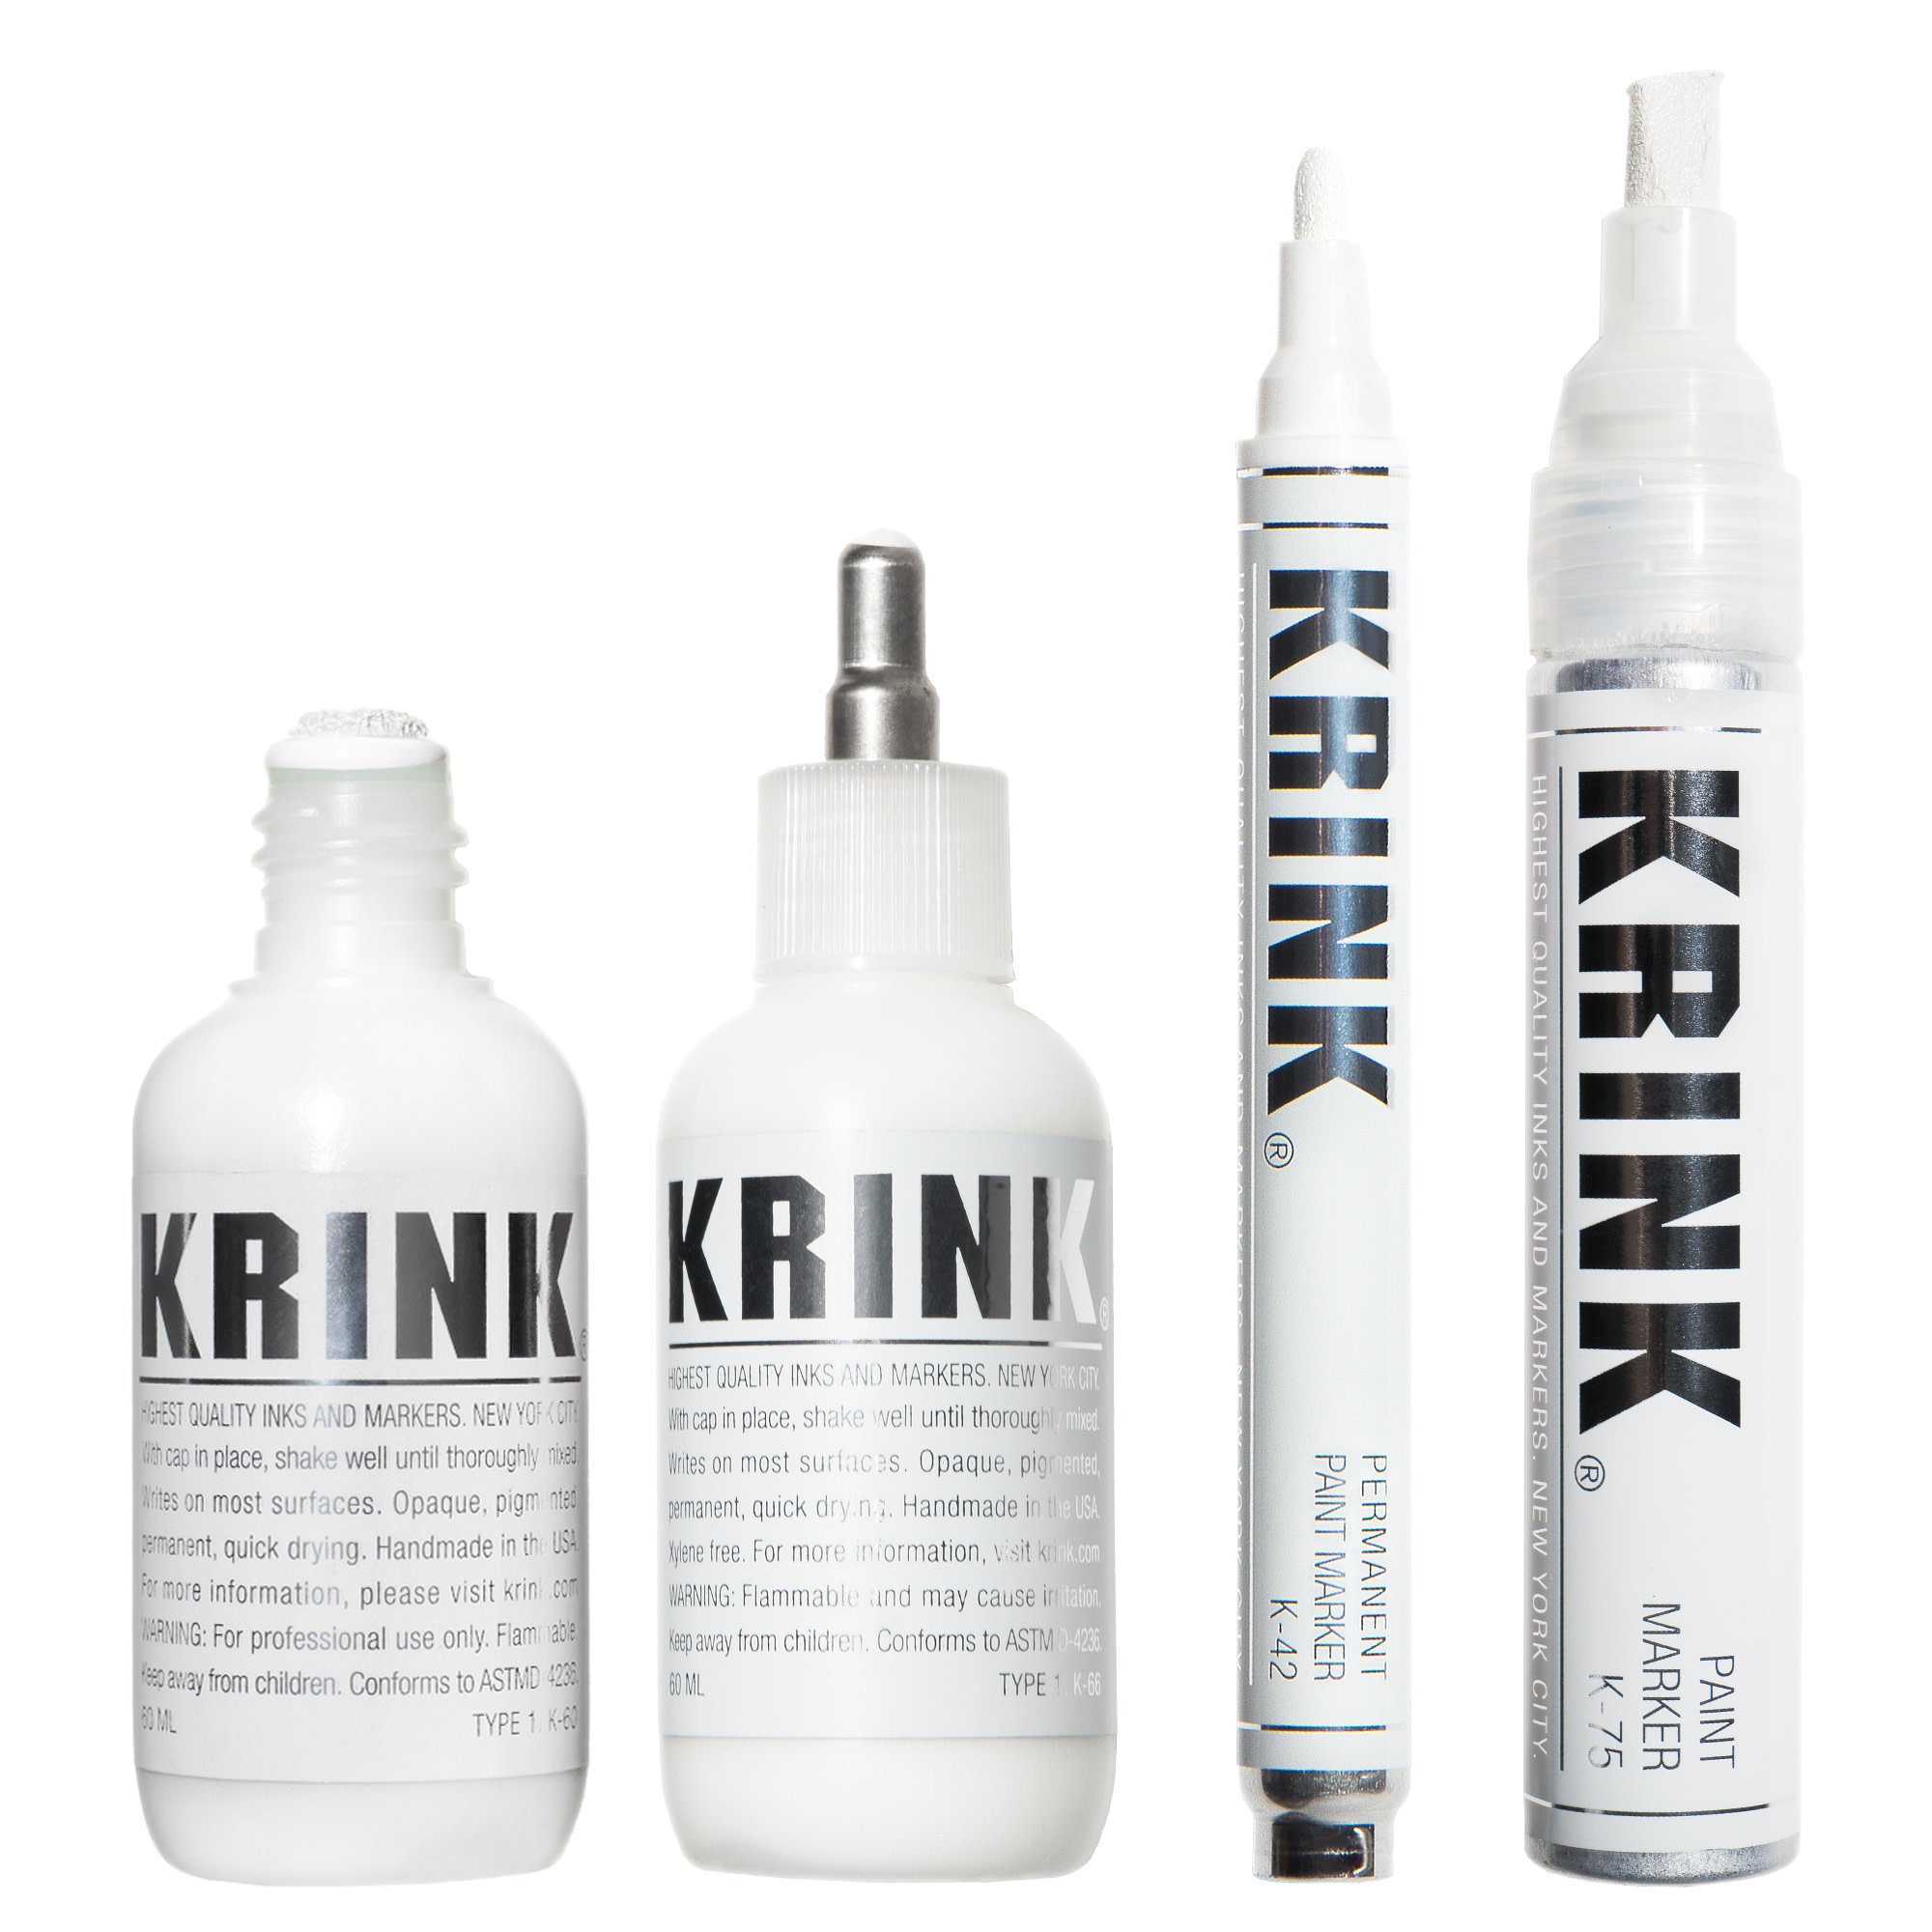 Krink K-75 Paint Markers - Set of 6